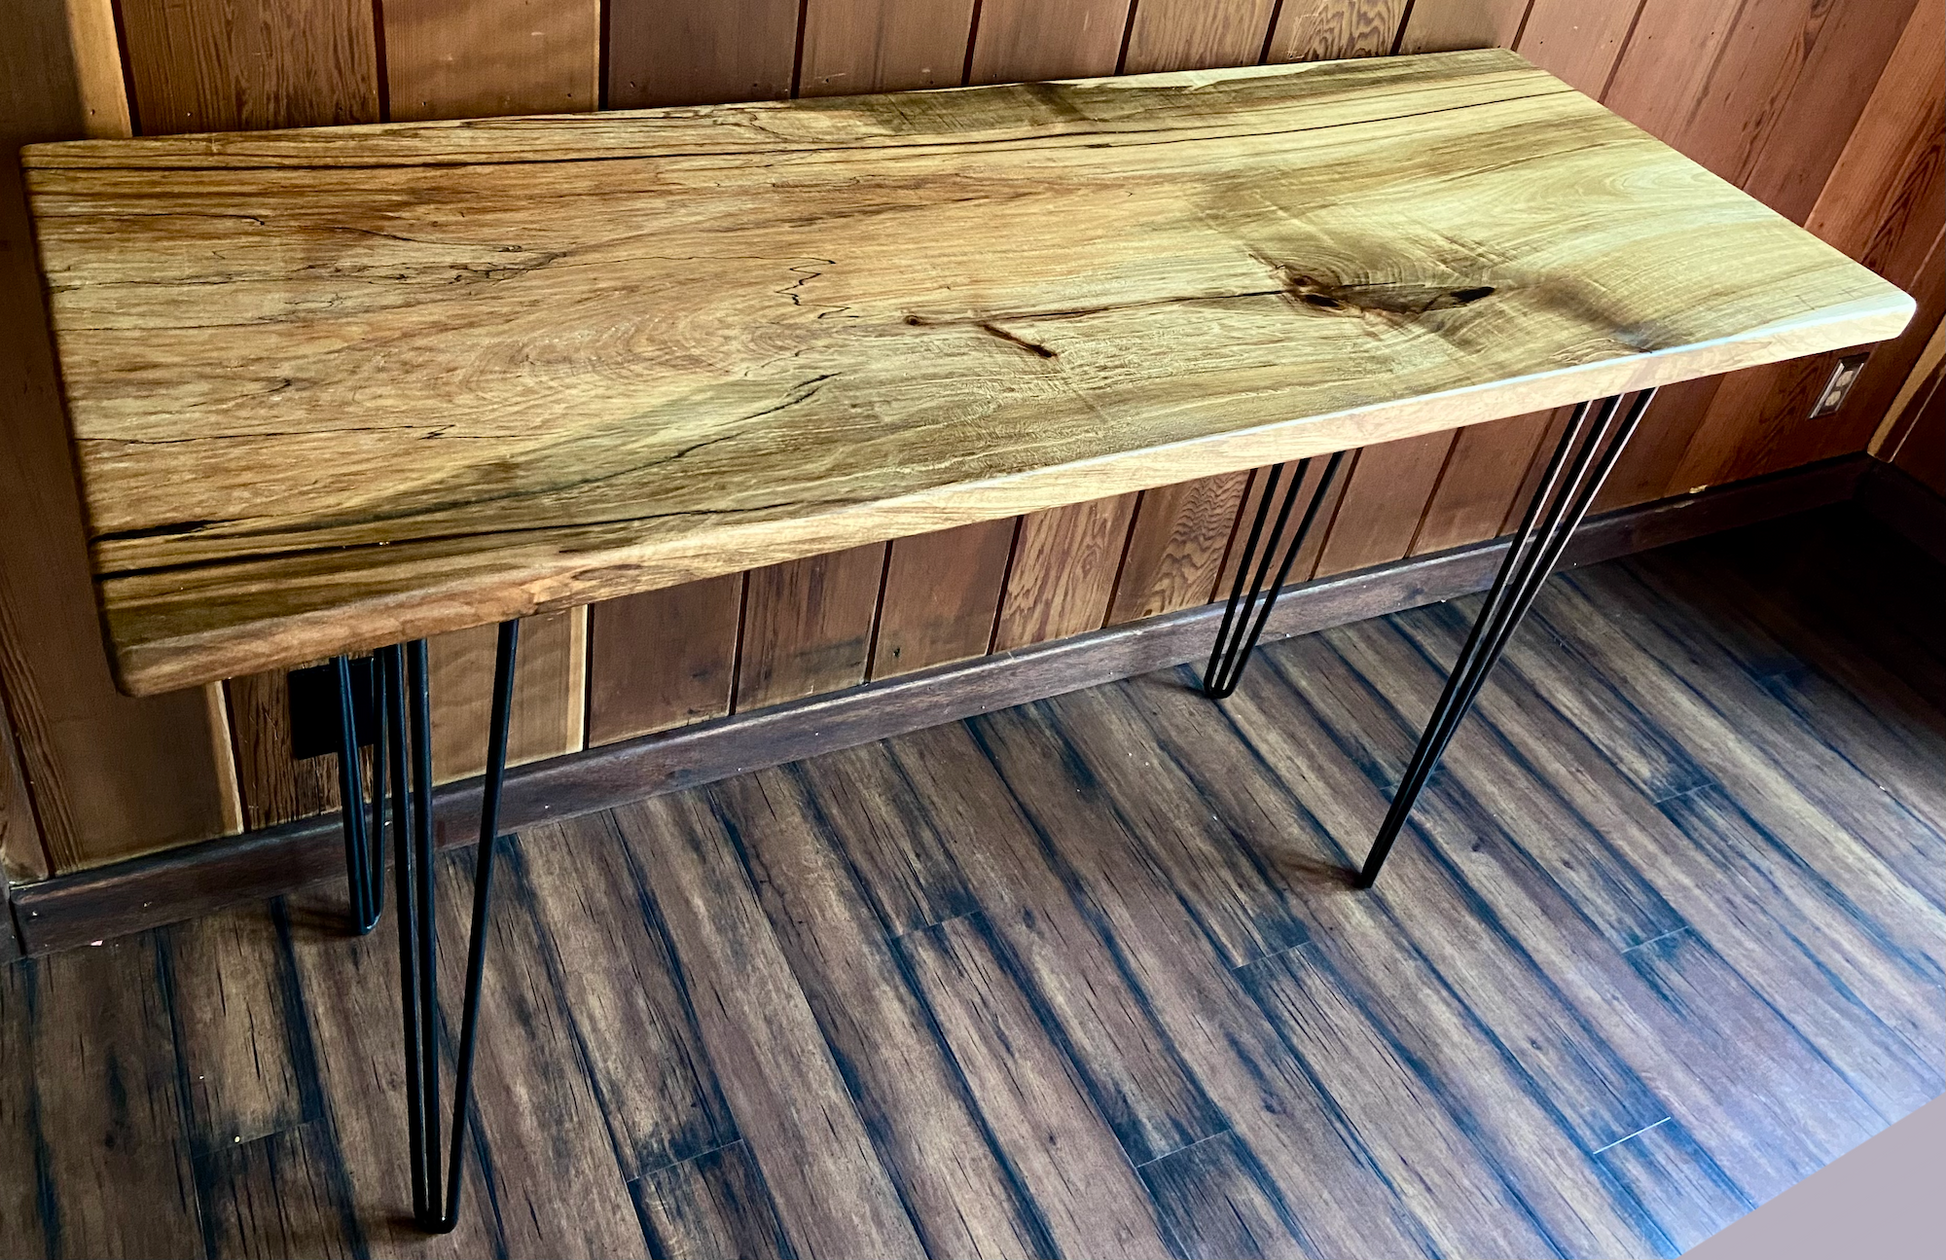 Solid Spalted Maple Wood Desk with High Figure and Unique Patterns | 5 Foot Long Desk | Standing Solid Wood Desk | Modern Rustic DeskSolid Spalted Maple Wood Desk with High Figure and Unique Patterns | 5 Foot Long Desk | Standing Solid Wood Desk | Modern Rustic Desk